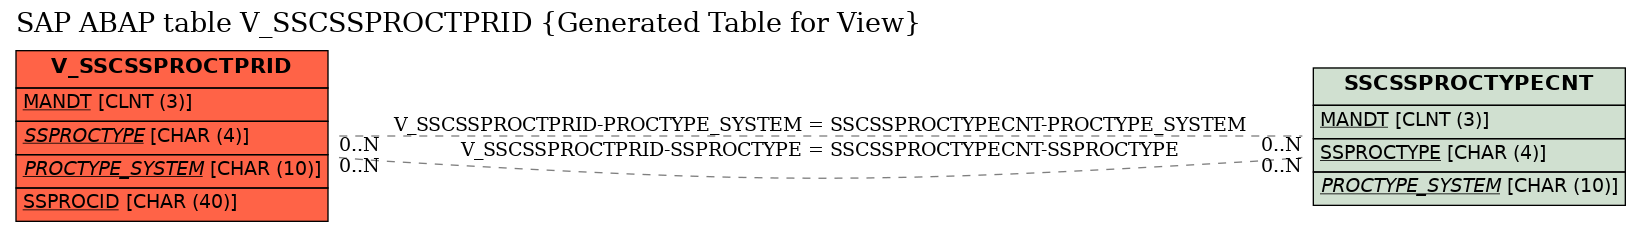 E-R Diagram for table V_SSCSSPROCTPRID (Generated Table for View)